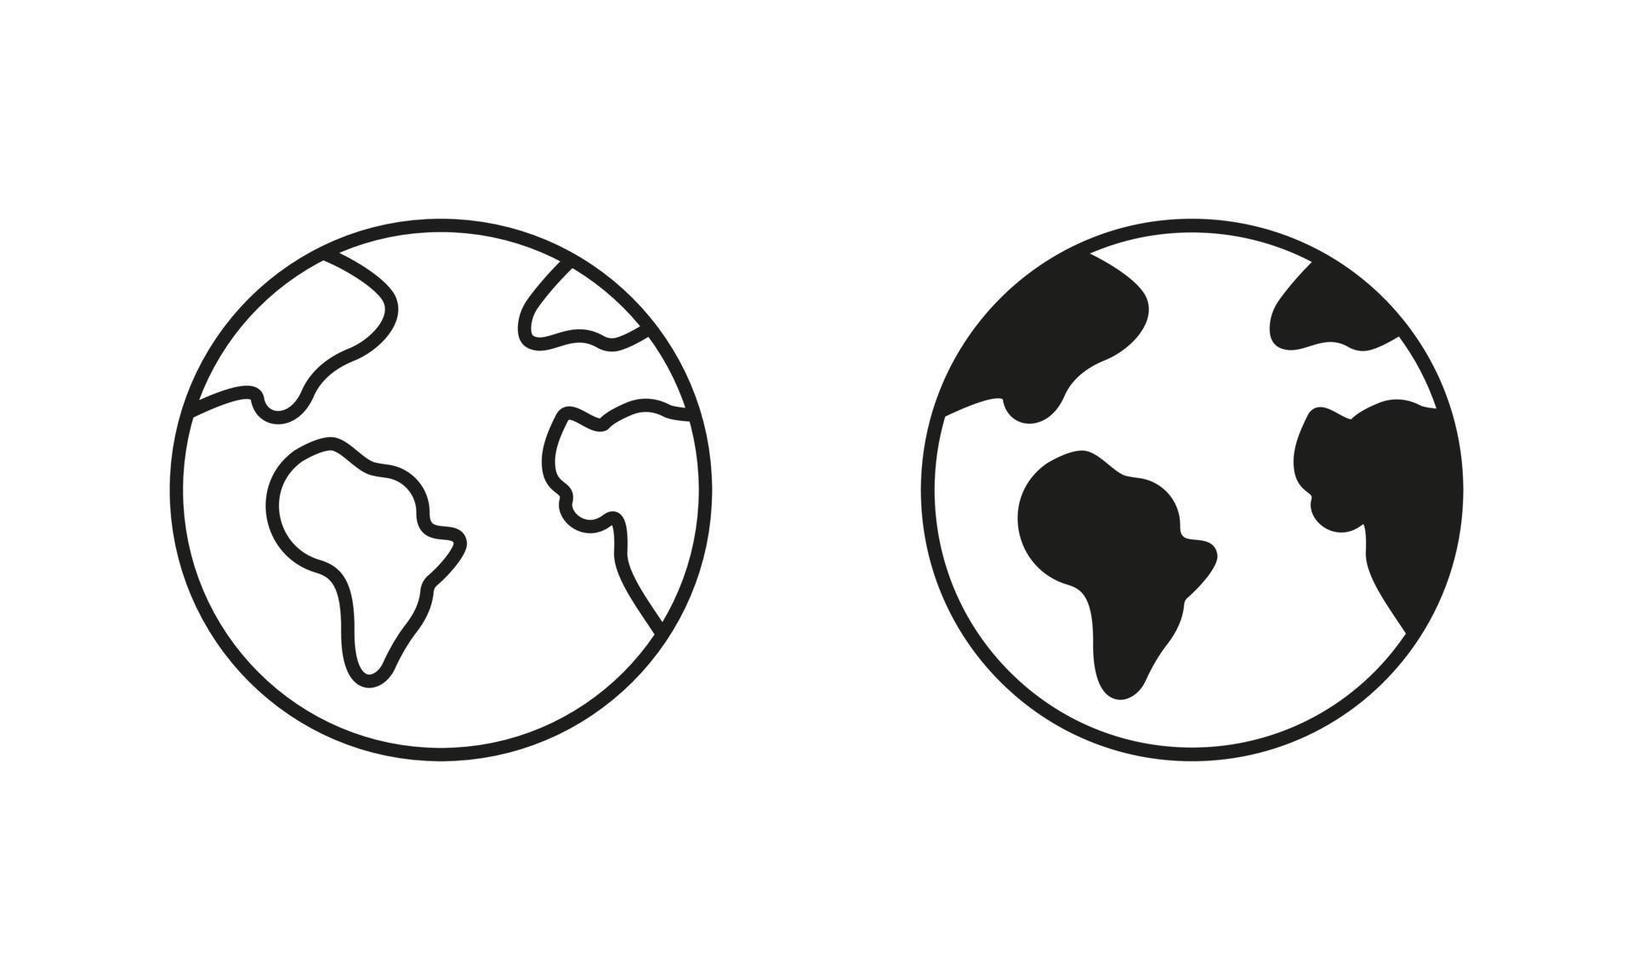 Globe Earth Silhouette and Line Icon Set. Global Planet Sphere Map Pictogram. Round World Continent Europe Africa America Australia Asia Sign. Editable Stroke. Isolated Vector Illustration.